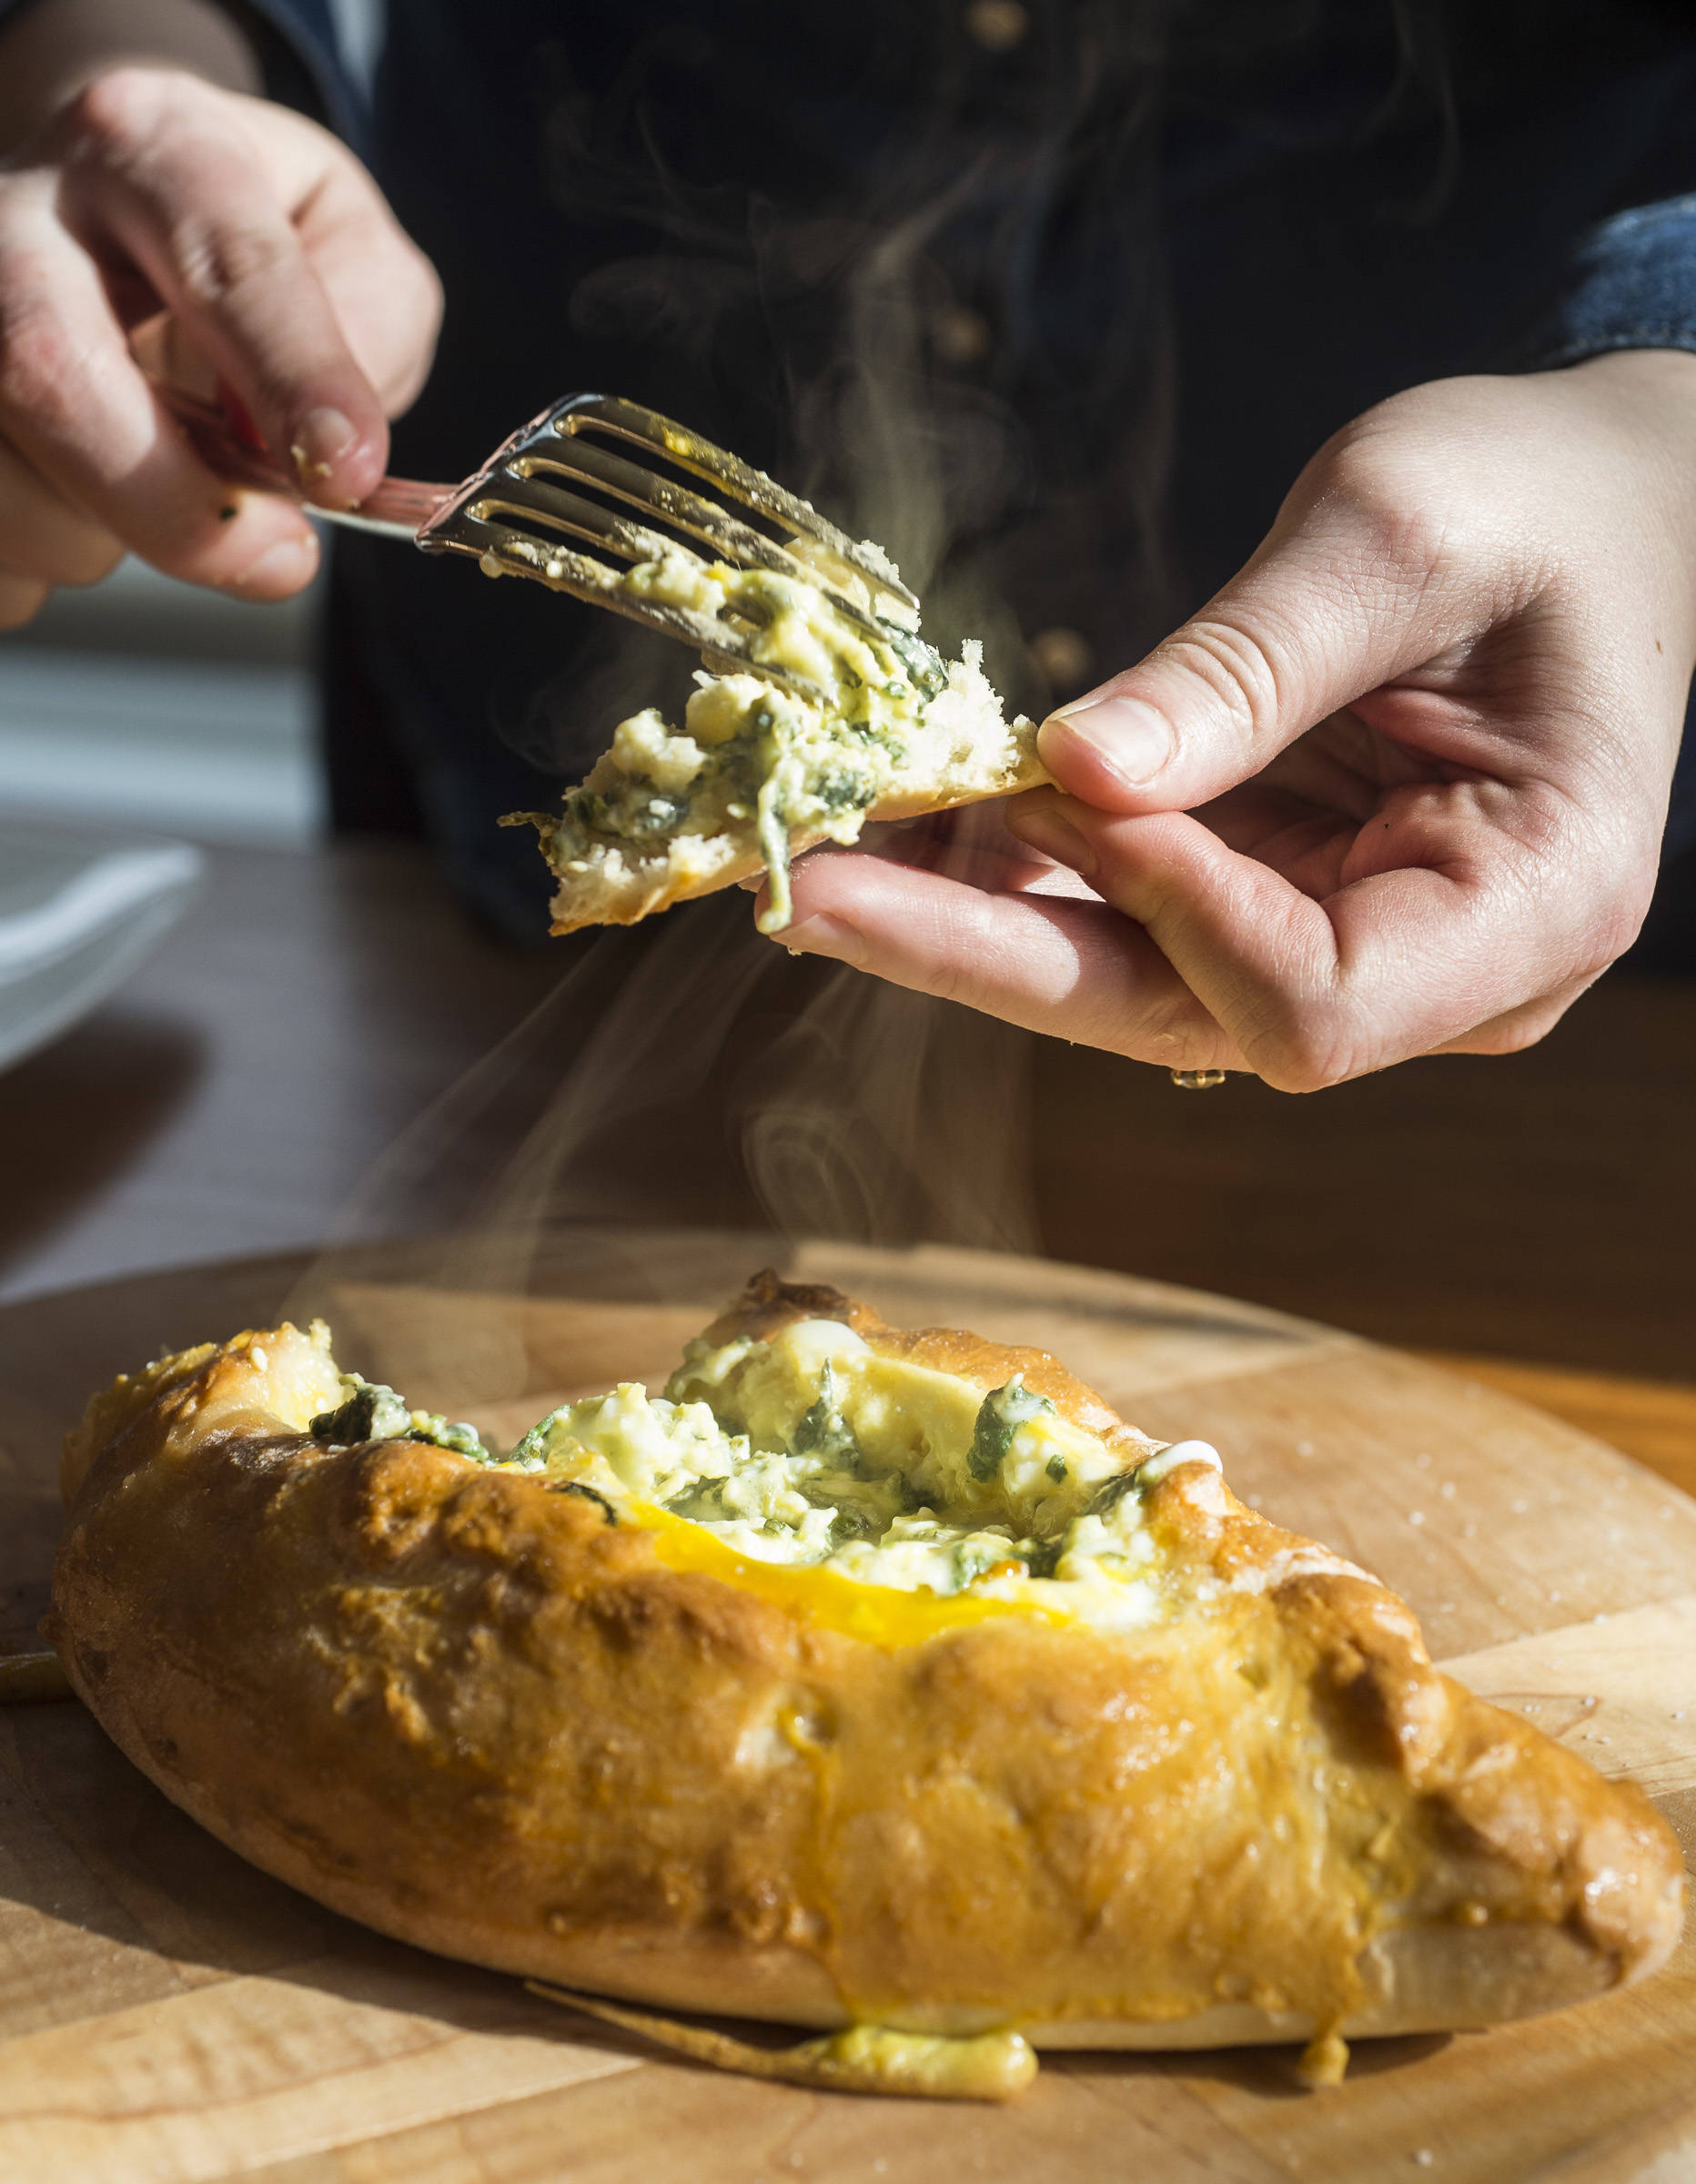 Erin Anais Heist prepares and bakes a khachapuri with nettles, feta and mozzarella cheese and topped with an egg on Friday, April 12, 2019. (Michael Penn | Juneau Empire)